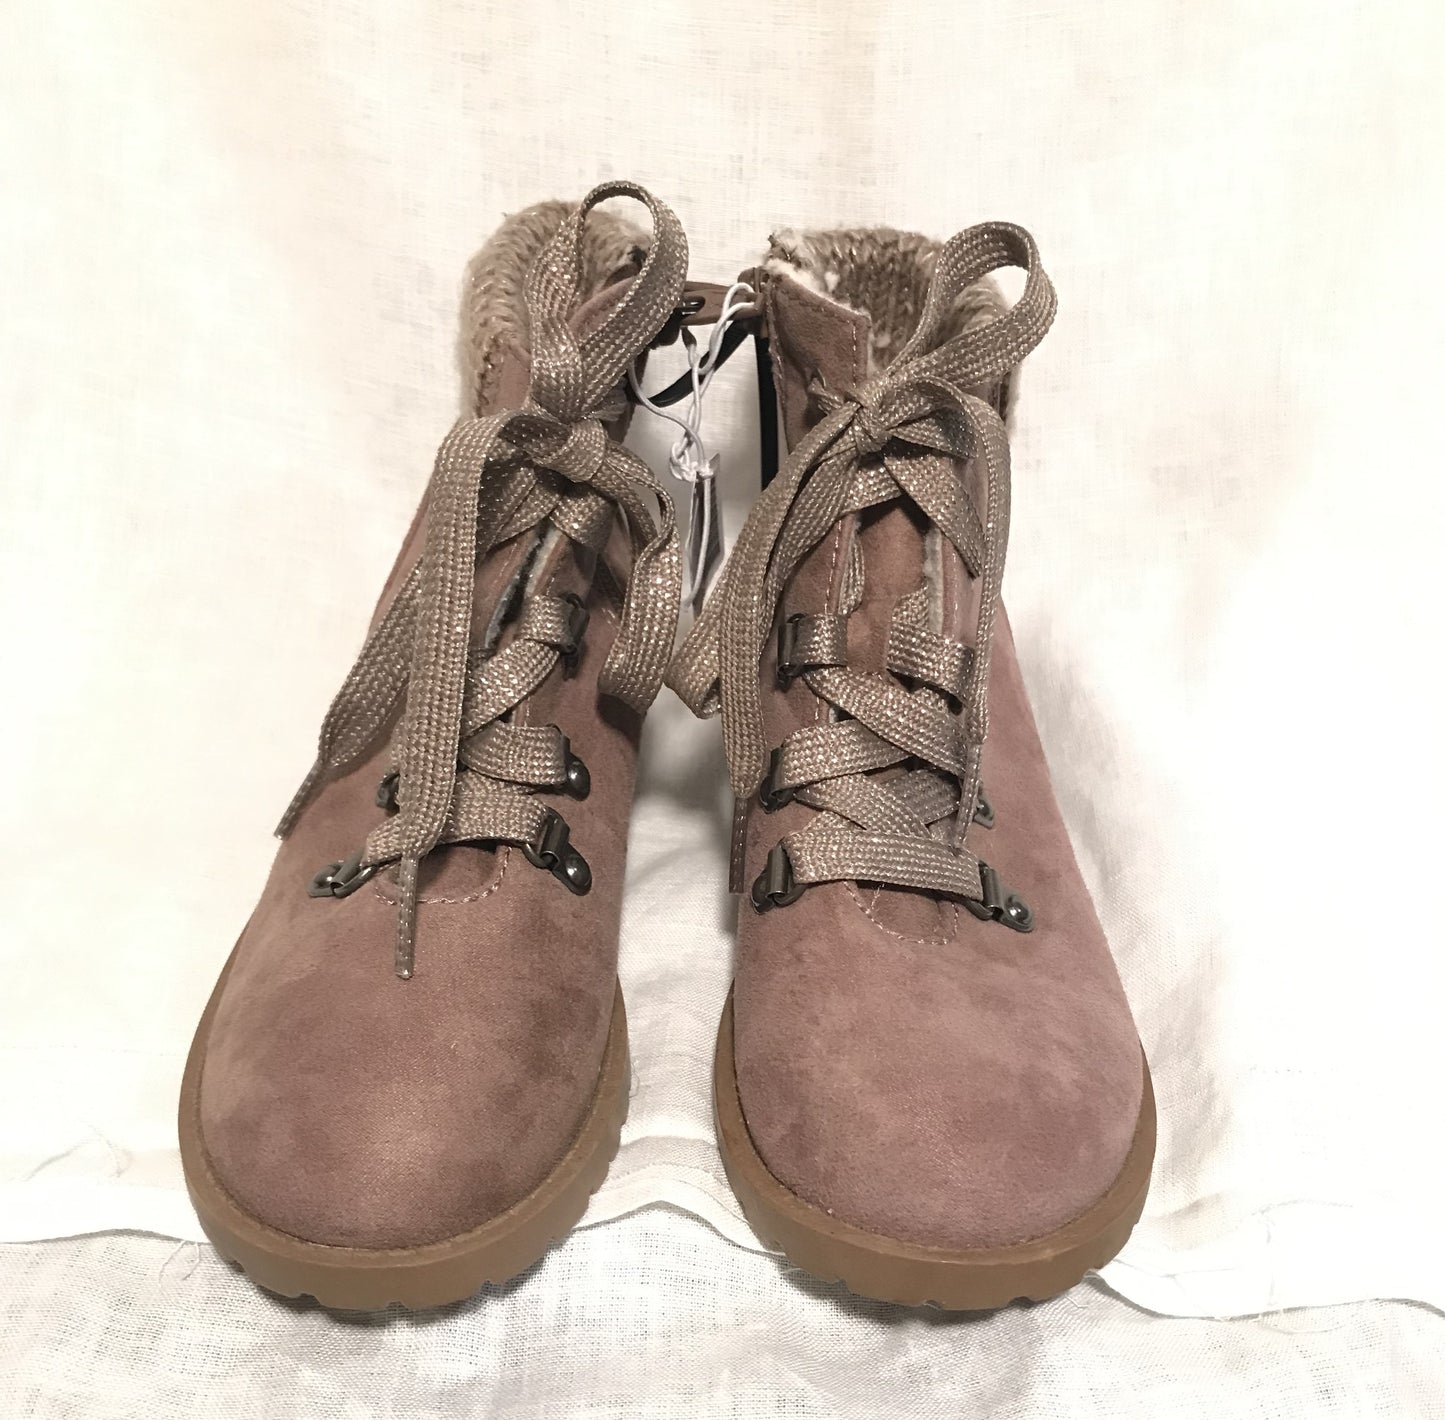 Tan Suede Boots- Size 2